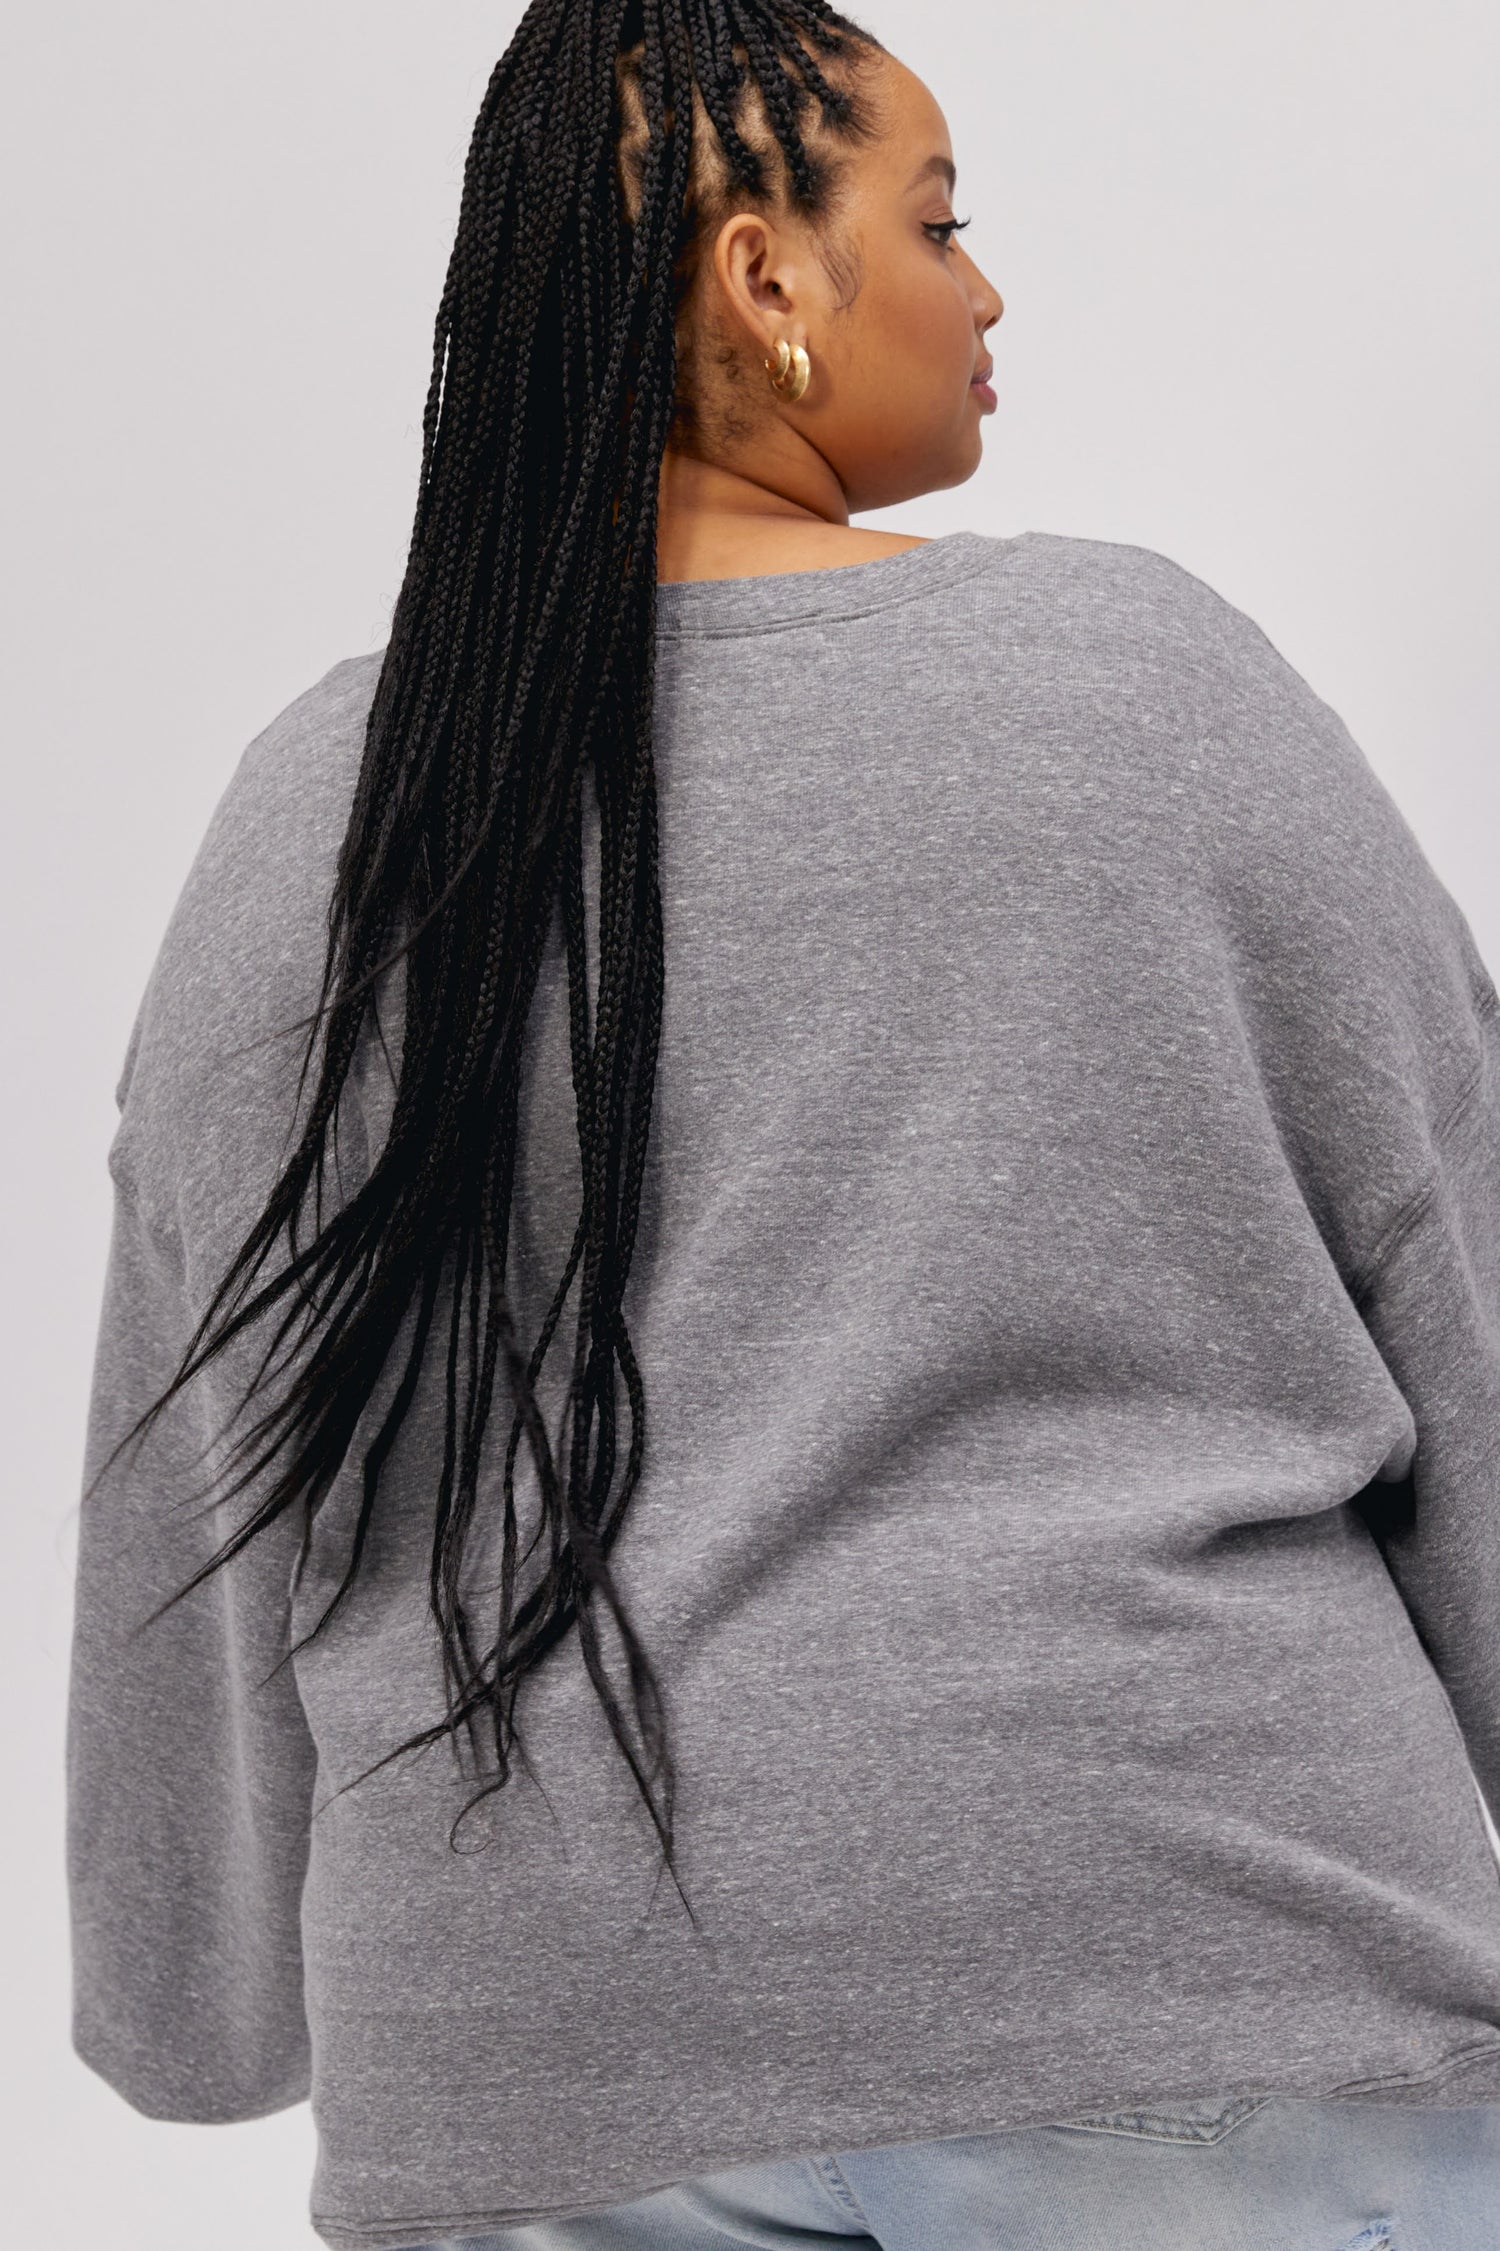 Plus size model wearing a grey crewneck sweatshirt with collegiate style 'New York' graphic lettering.